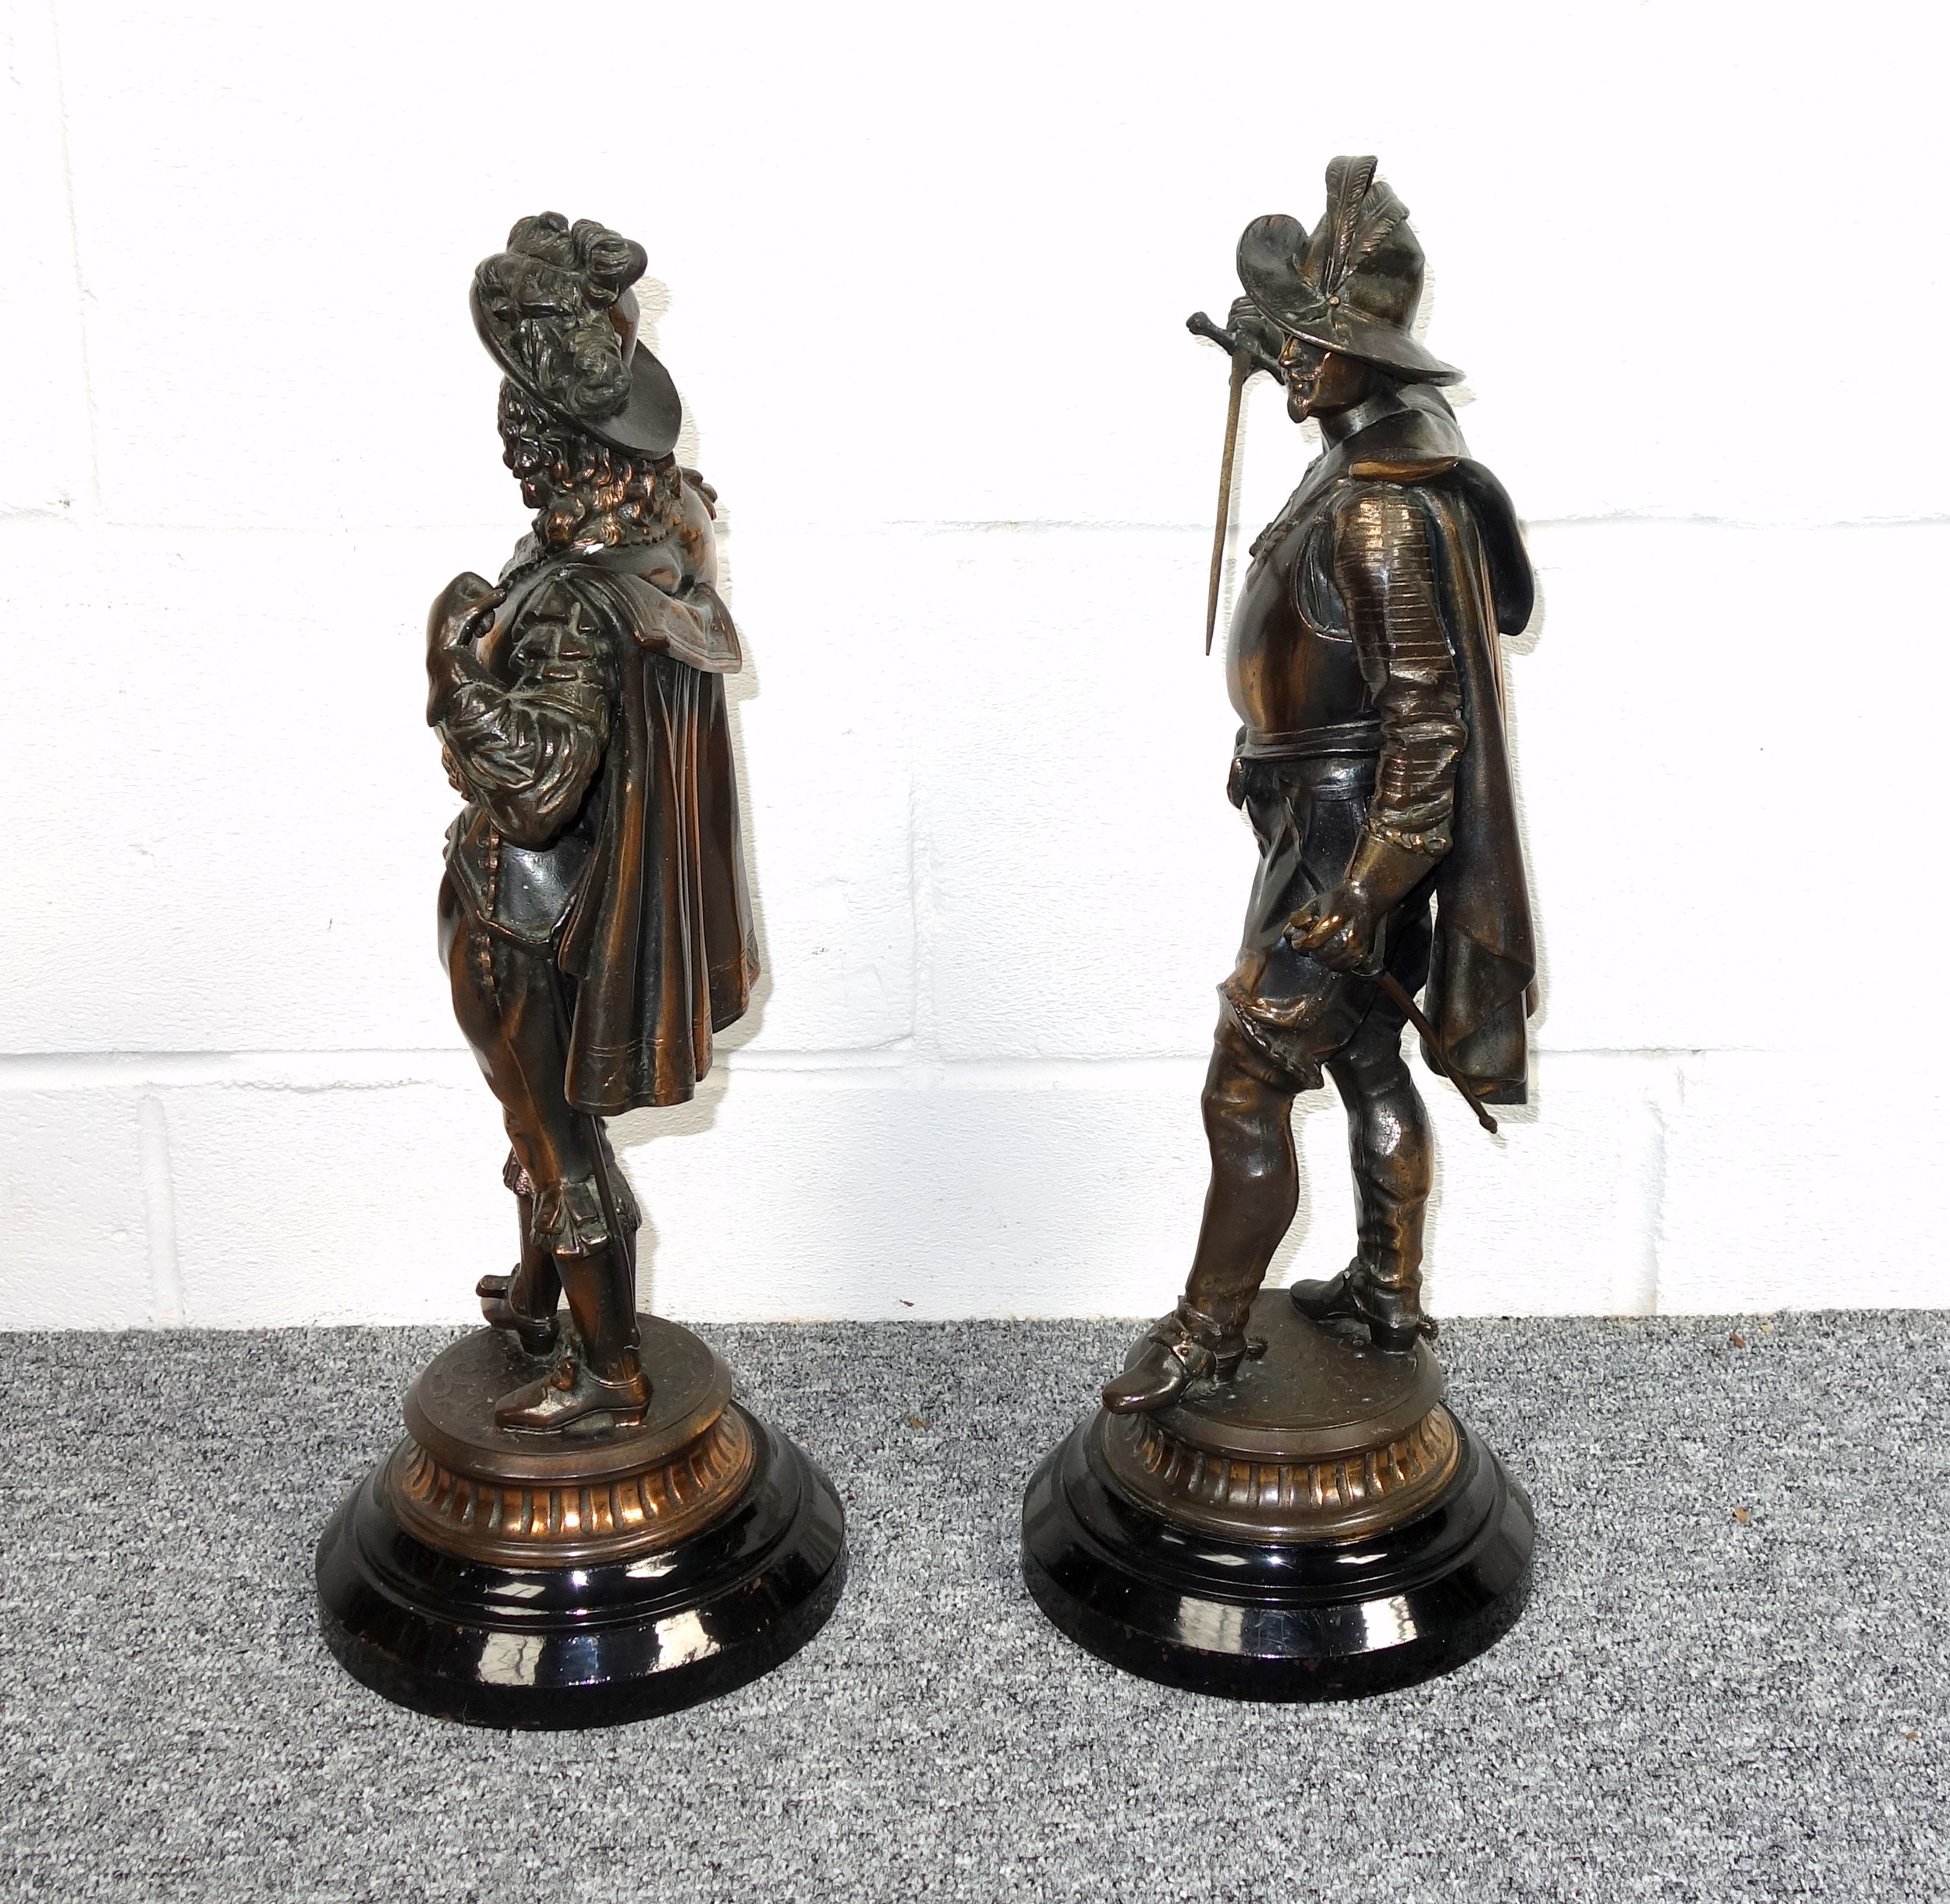 Pair of Late 19th Century French spelter figures of courtiers, each with a sword, standing on a - Image 2 of 4